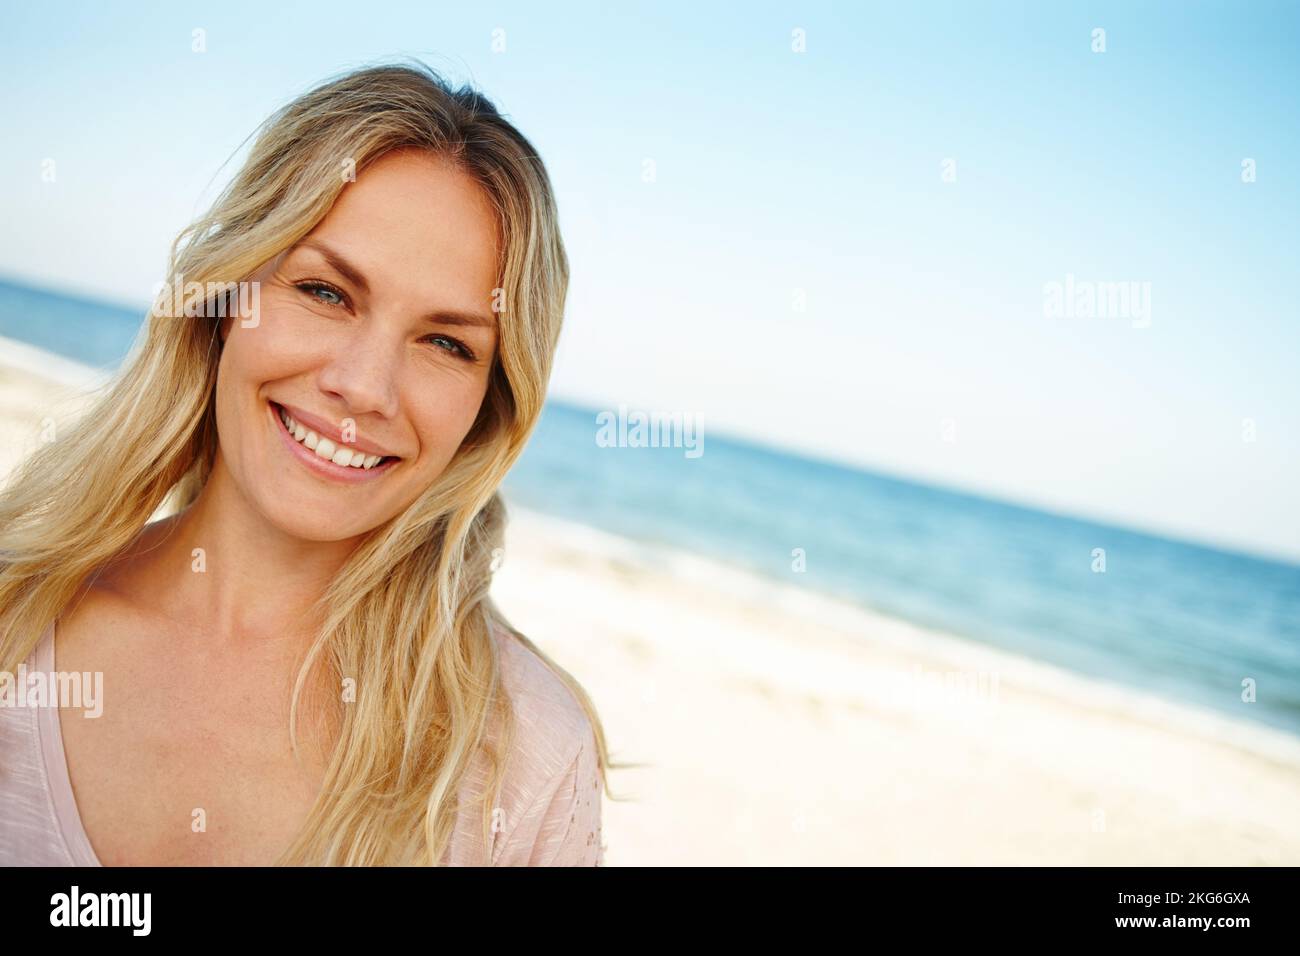 This is paradise. Head and shoulders portrait of an attractive young woman standing on a sunny beach. Stock Photo